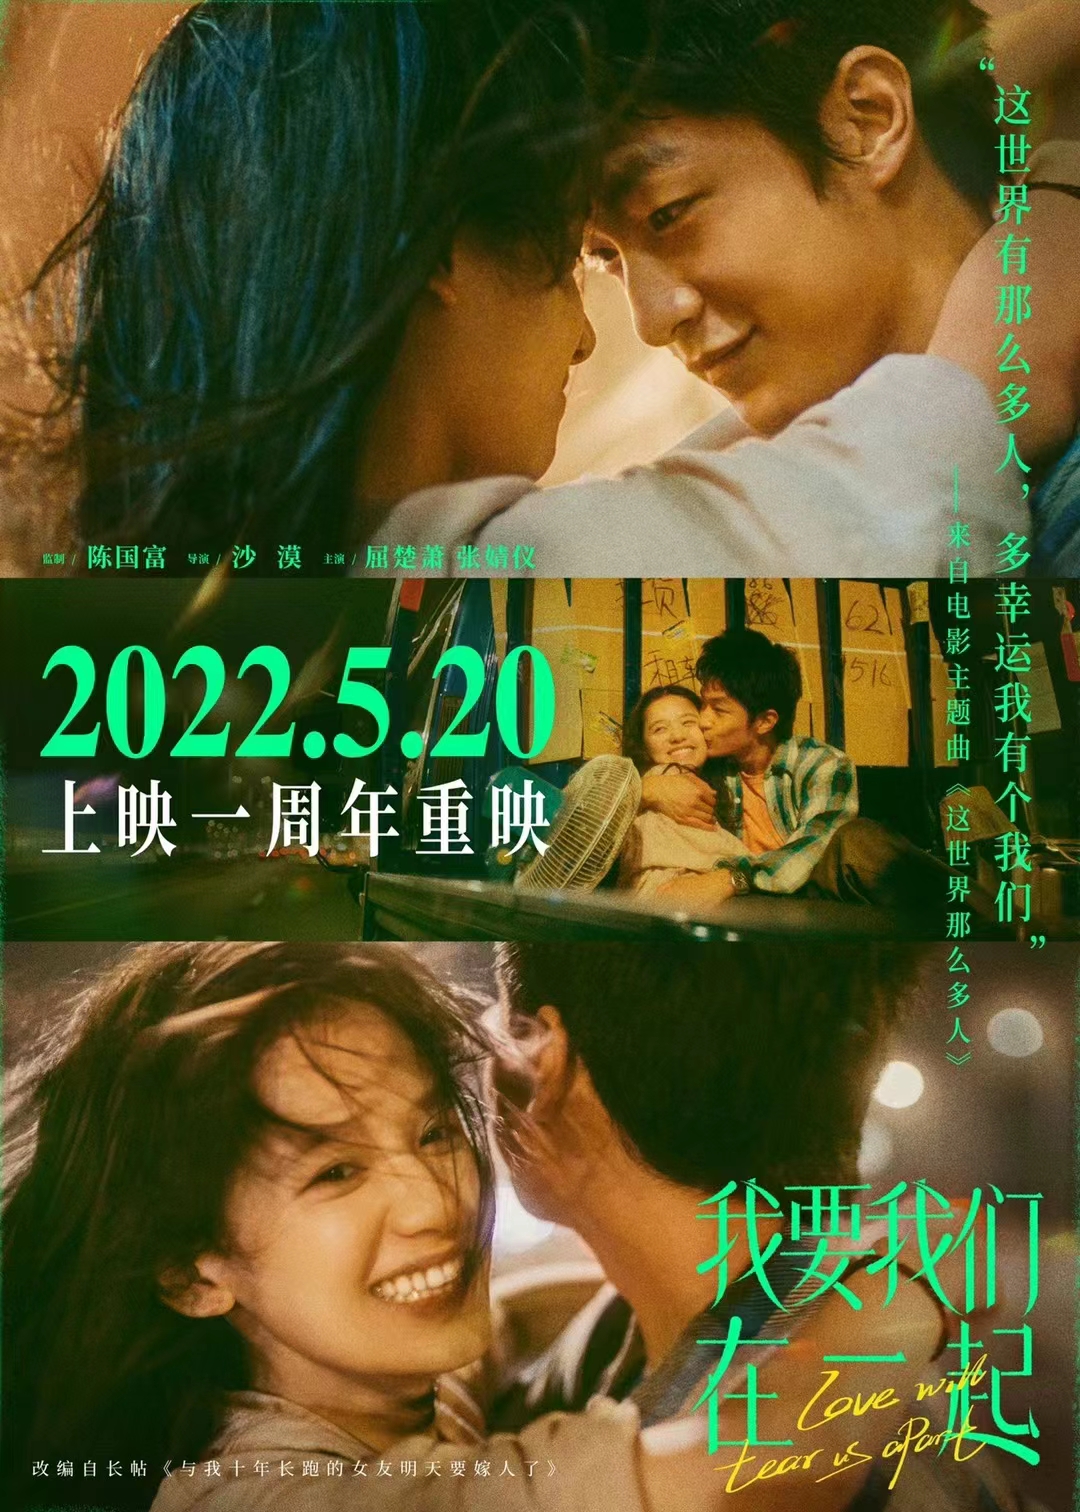 "I Want Us To Be Together" Rescreen Poster